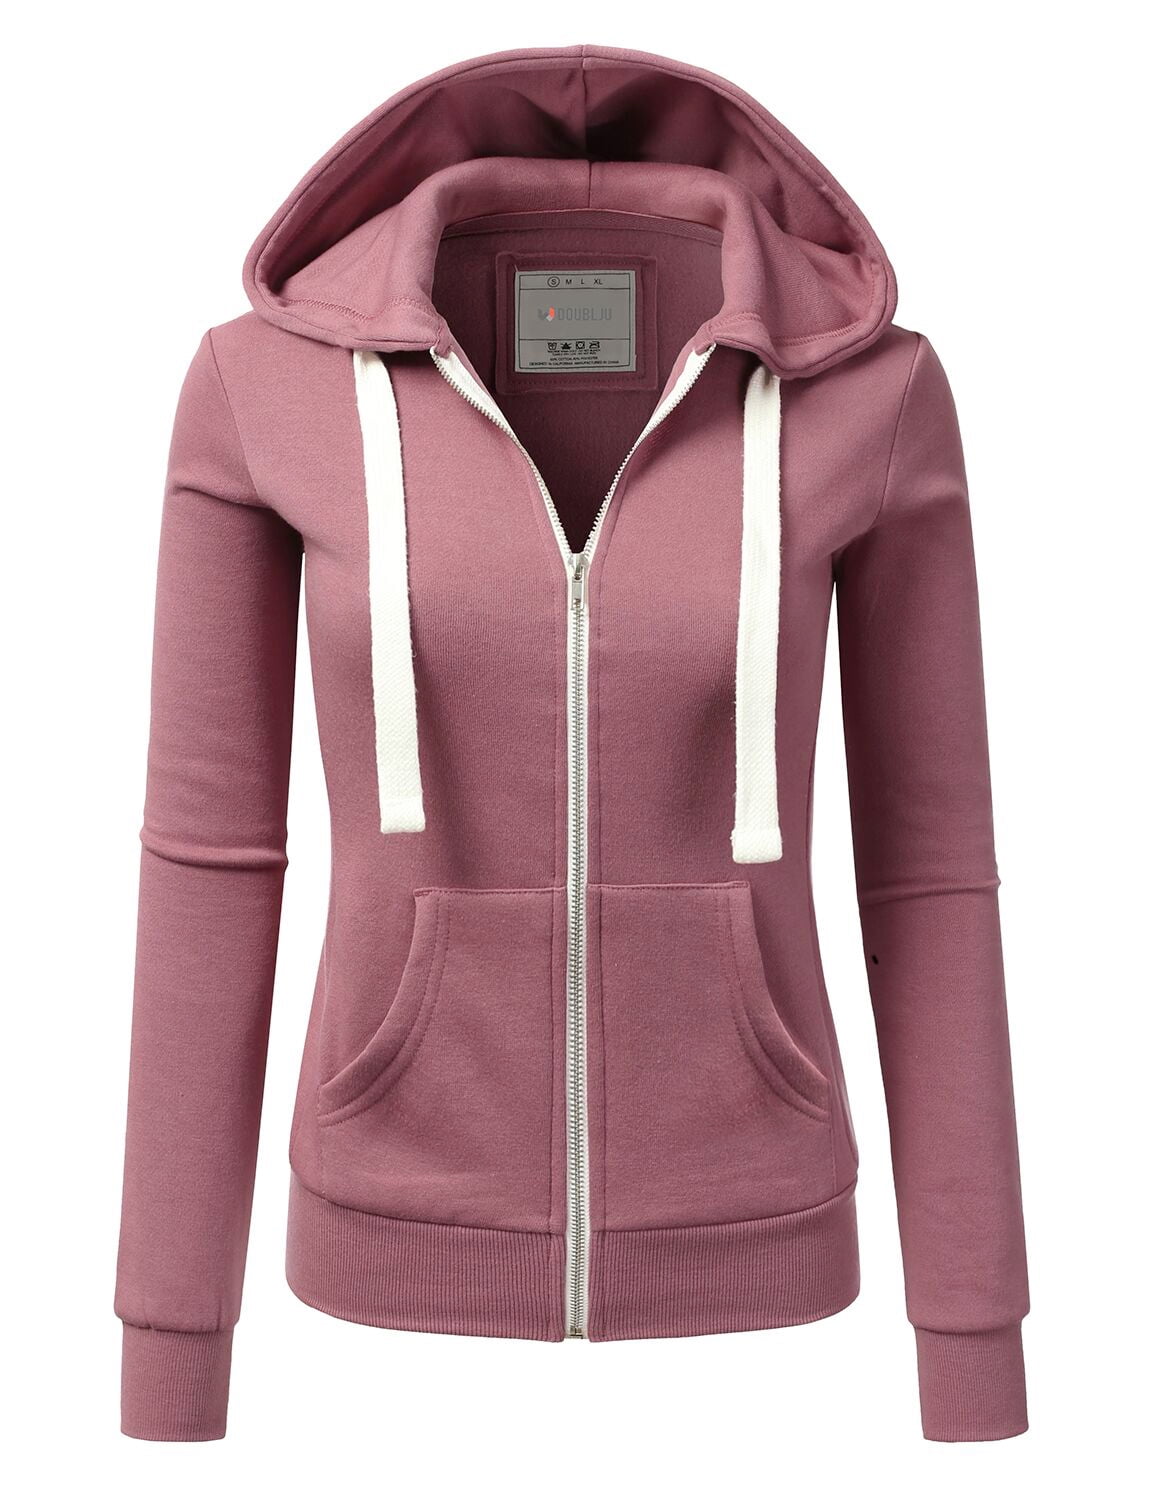 Doublju Womens Hooded Zip-Up Vest with Zipper Detail and Plus Size 